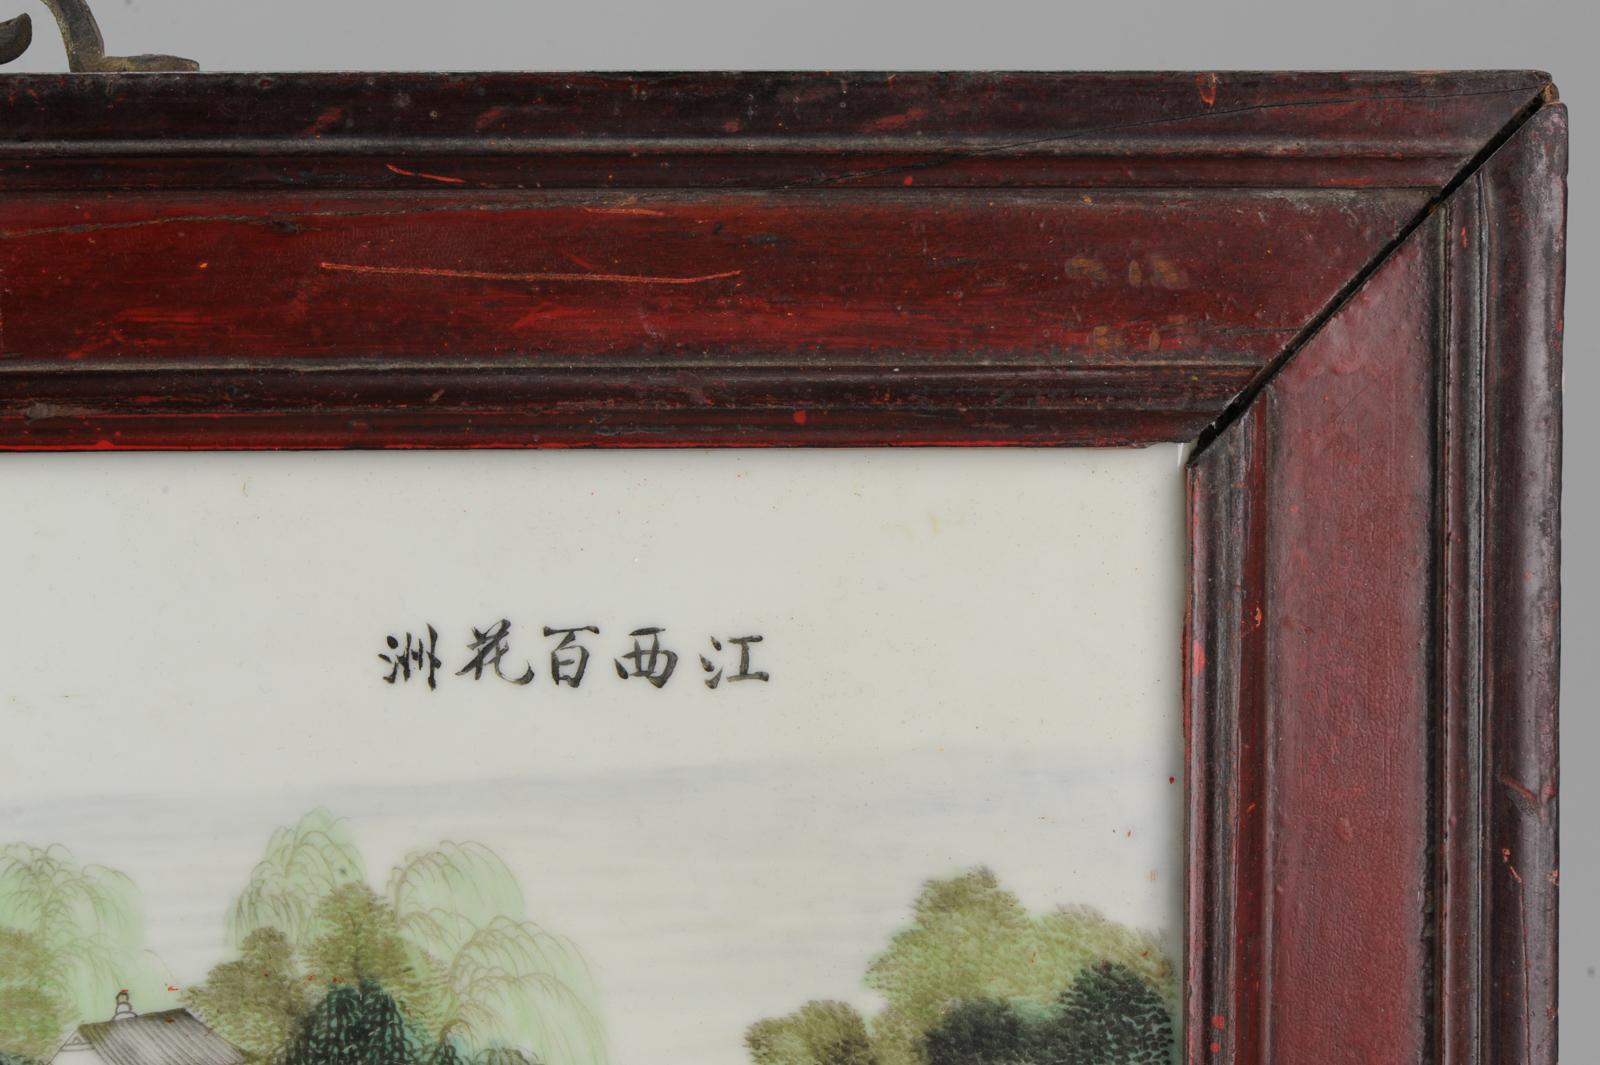 Faboulas Chinese porcelain Plaque with polychrome enamels in the family verte style, depicting a landscape view of Jingdezhen city In Jiangxi, could be Bai Hua Zhou or Xiao Gu Shan.

China, circa 1960.

In wooden frame.

Condition
Overall